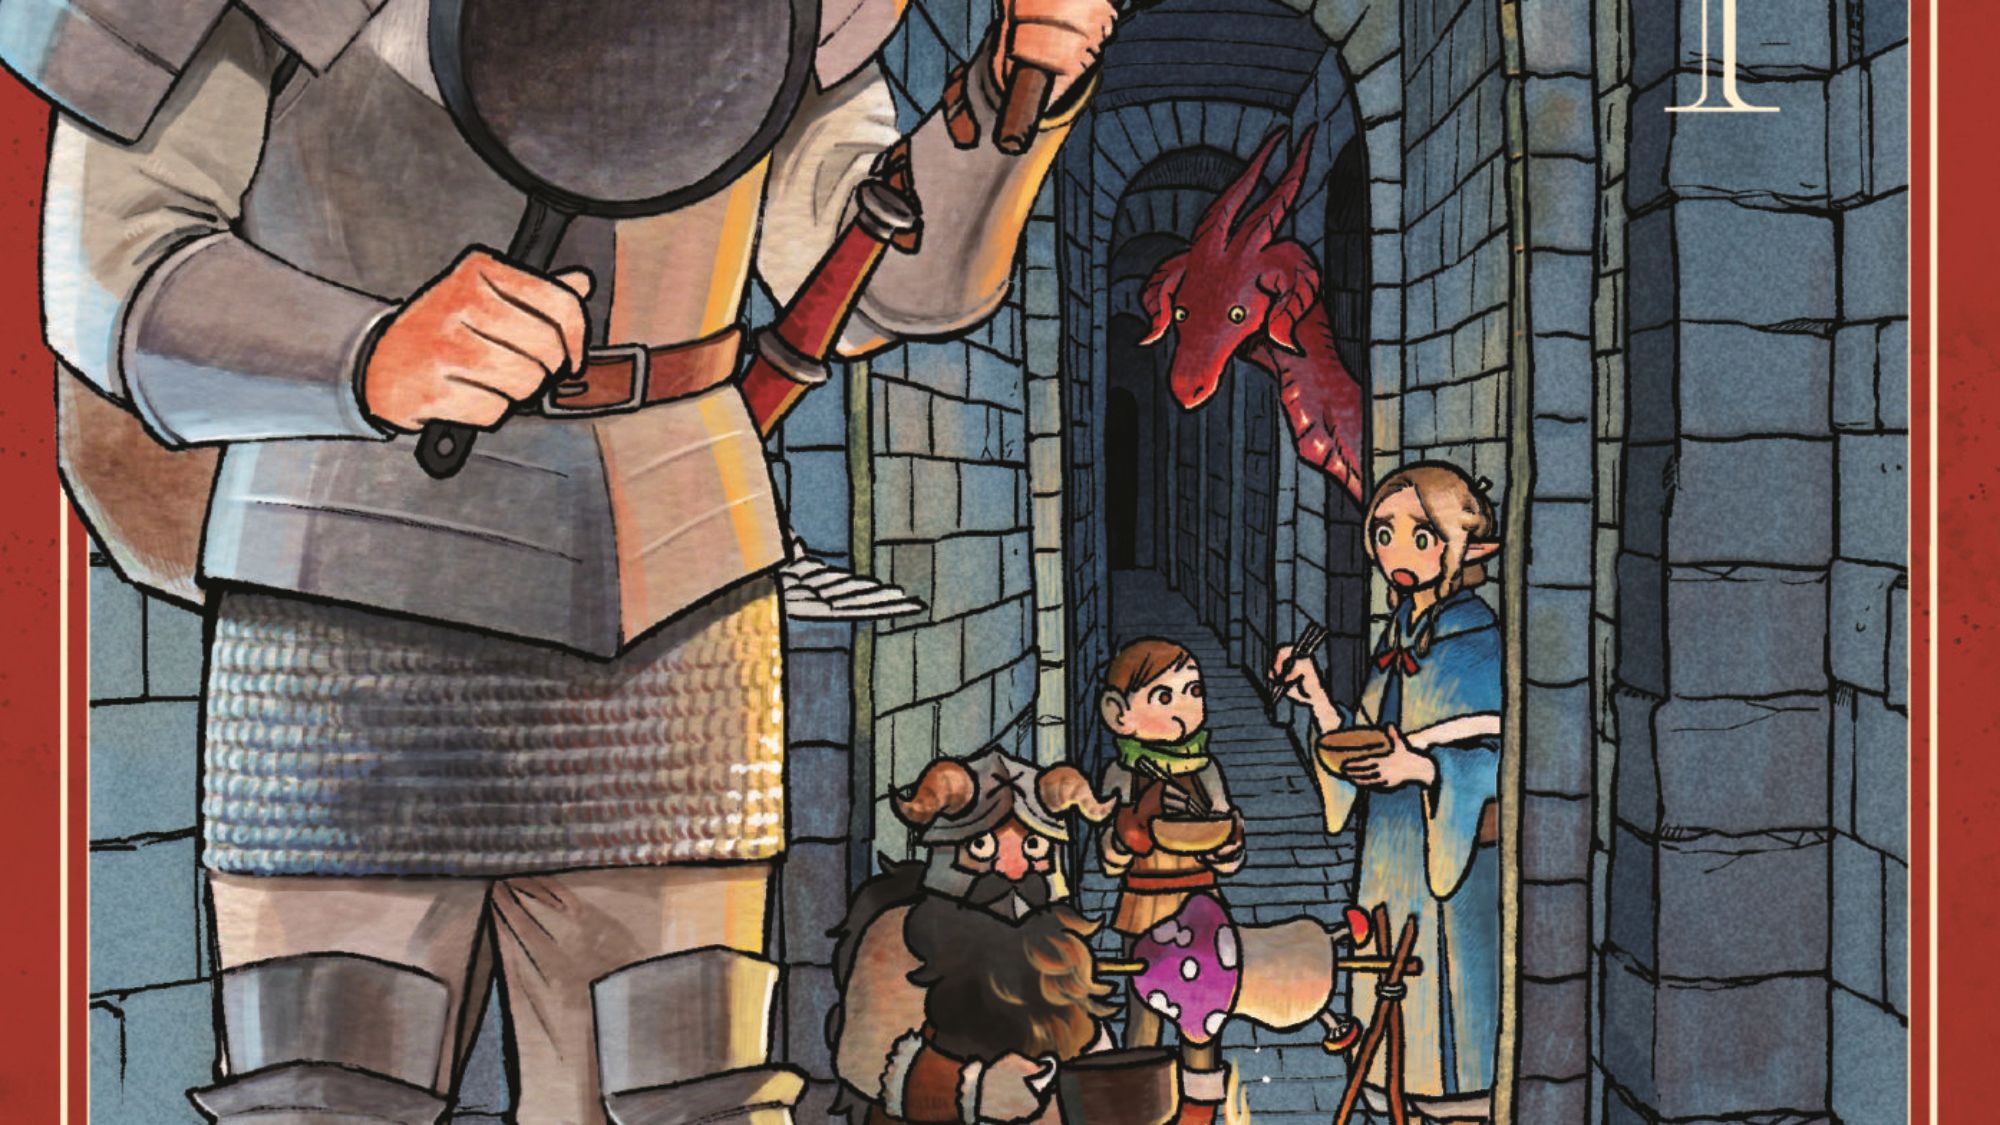 Delicious in Dungeon Creator Ryoko Kui is Guest of Honor at Anime Expo